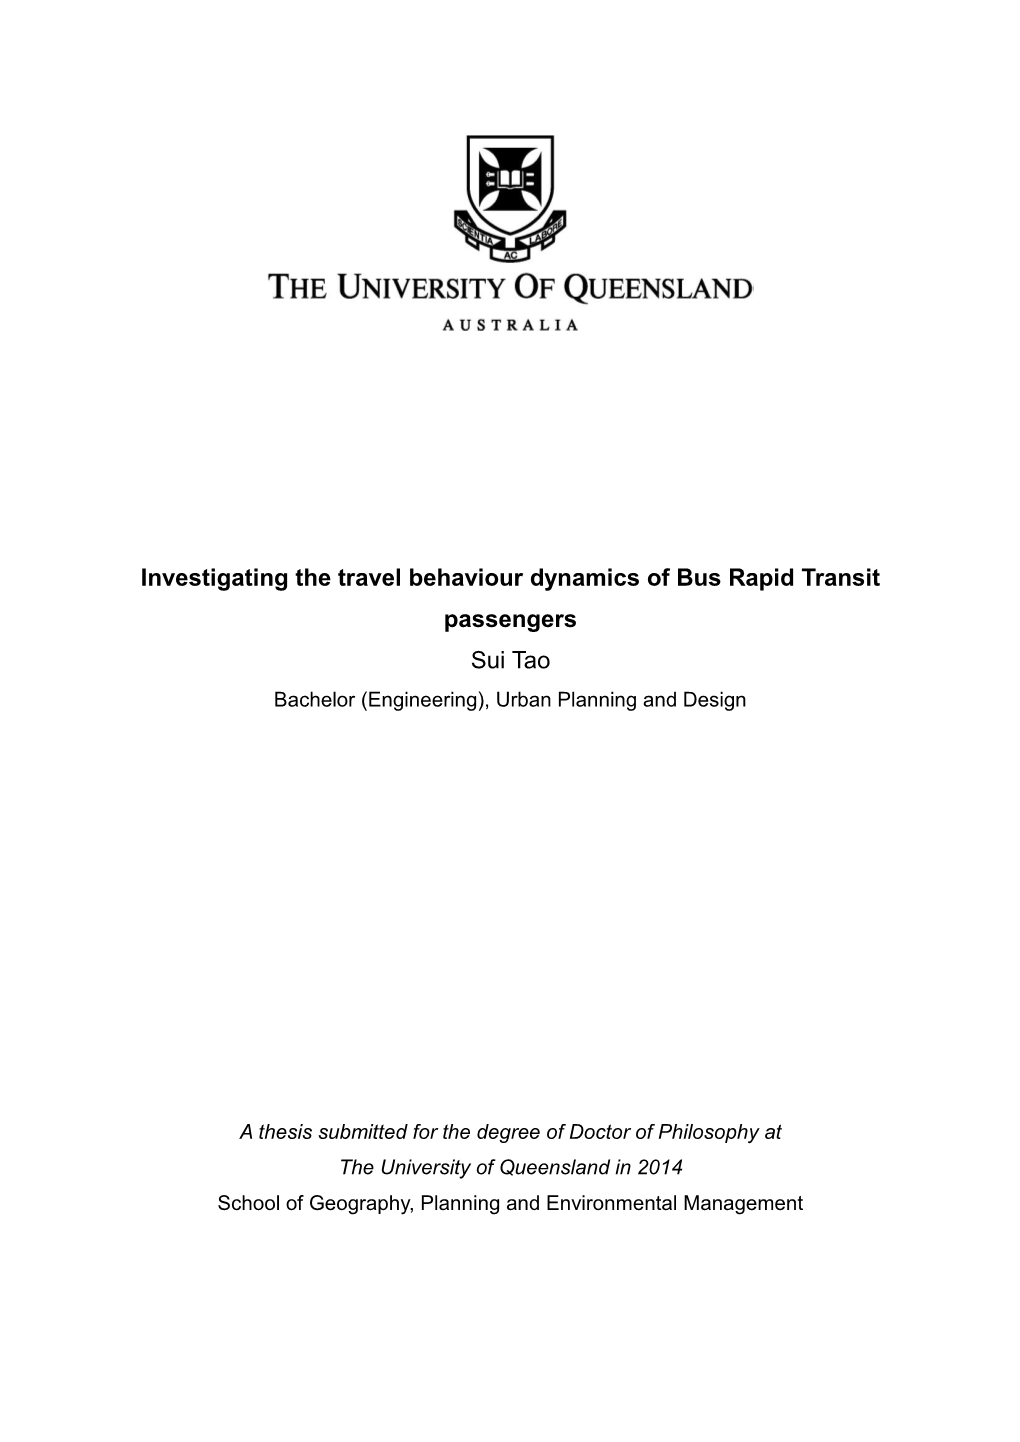 Investigating the Travel Behaviour Dynamics of Bus Rapid Transit Passengers Sui Tao Bachelor (Engineering), Urban Planning and Design